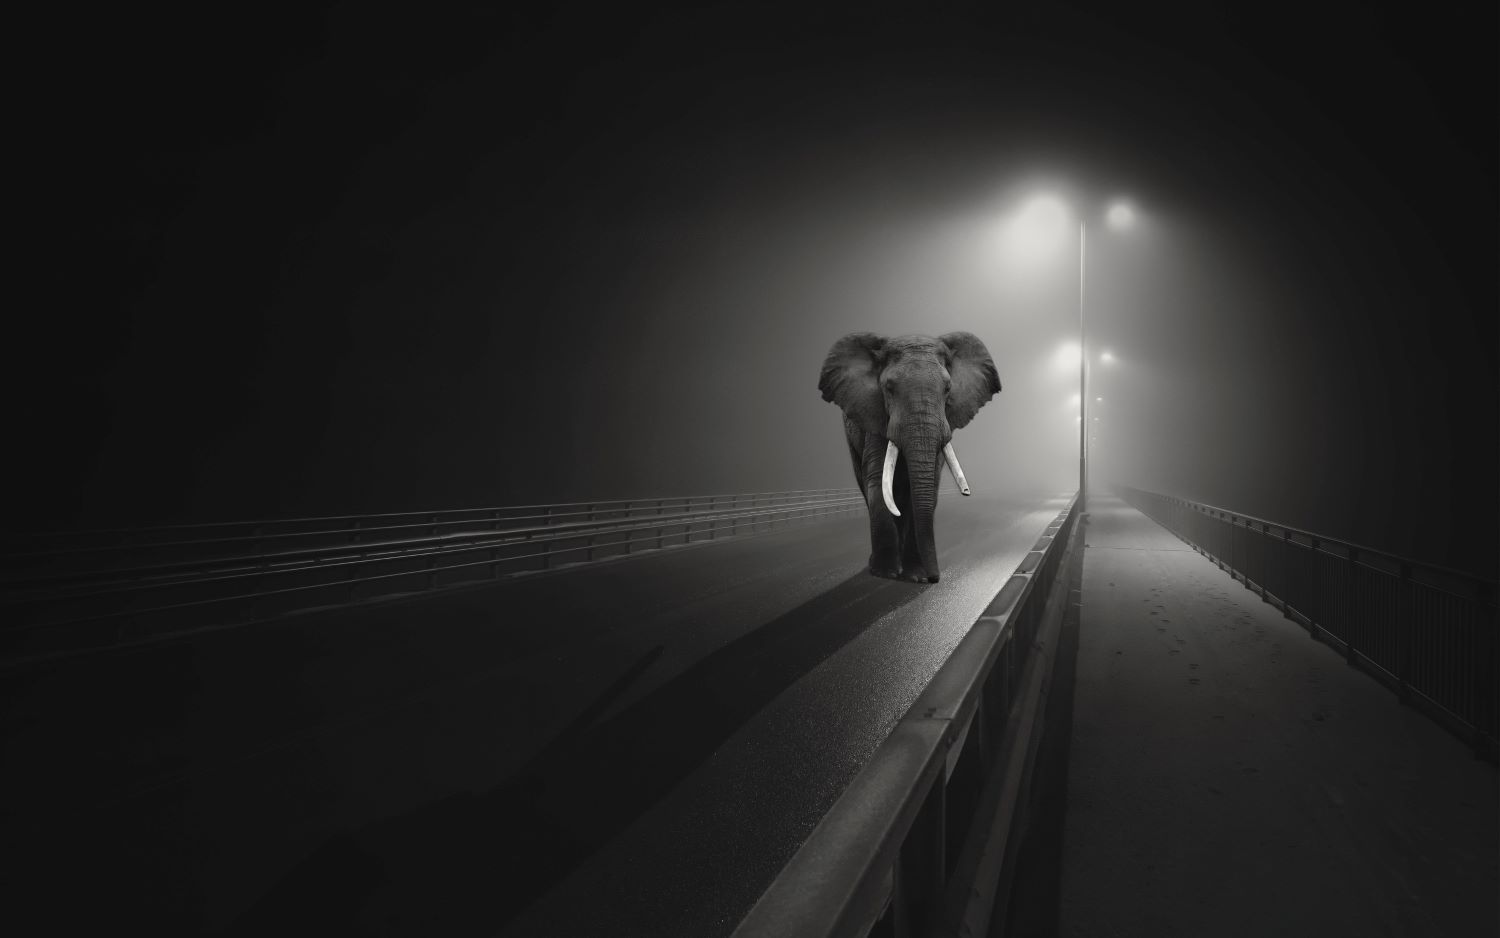 An elephant on the road